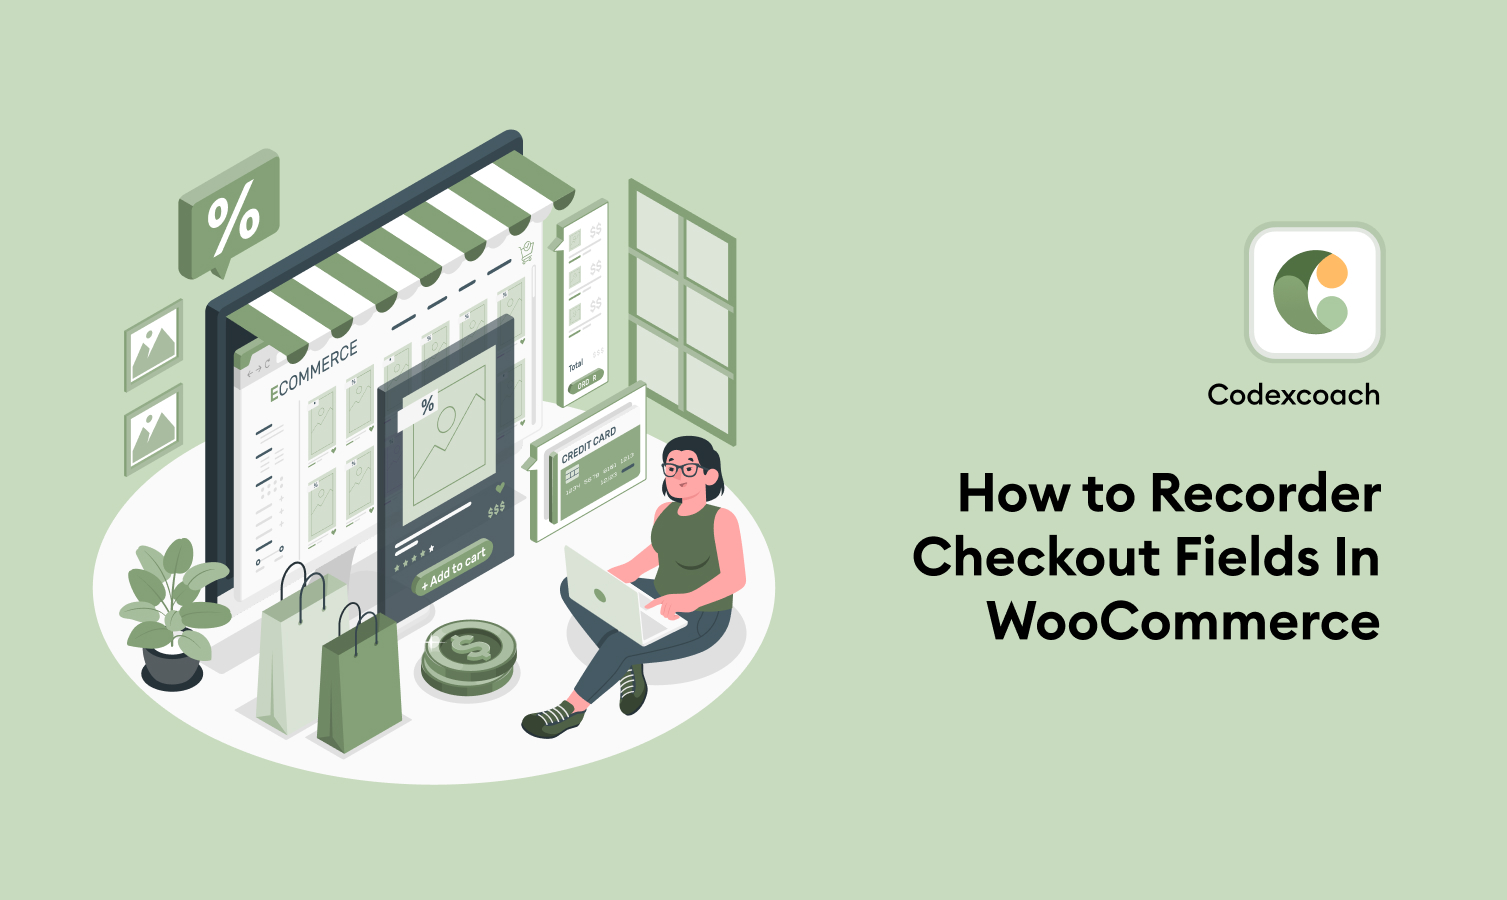 How to Reorder Checkout Fields In WooCommerce